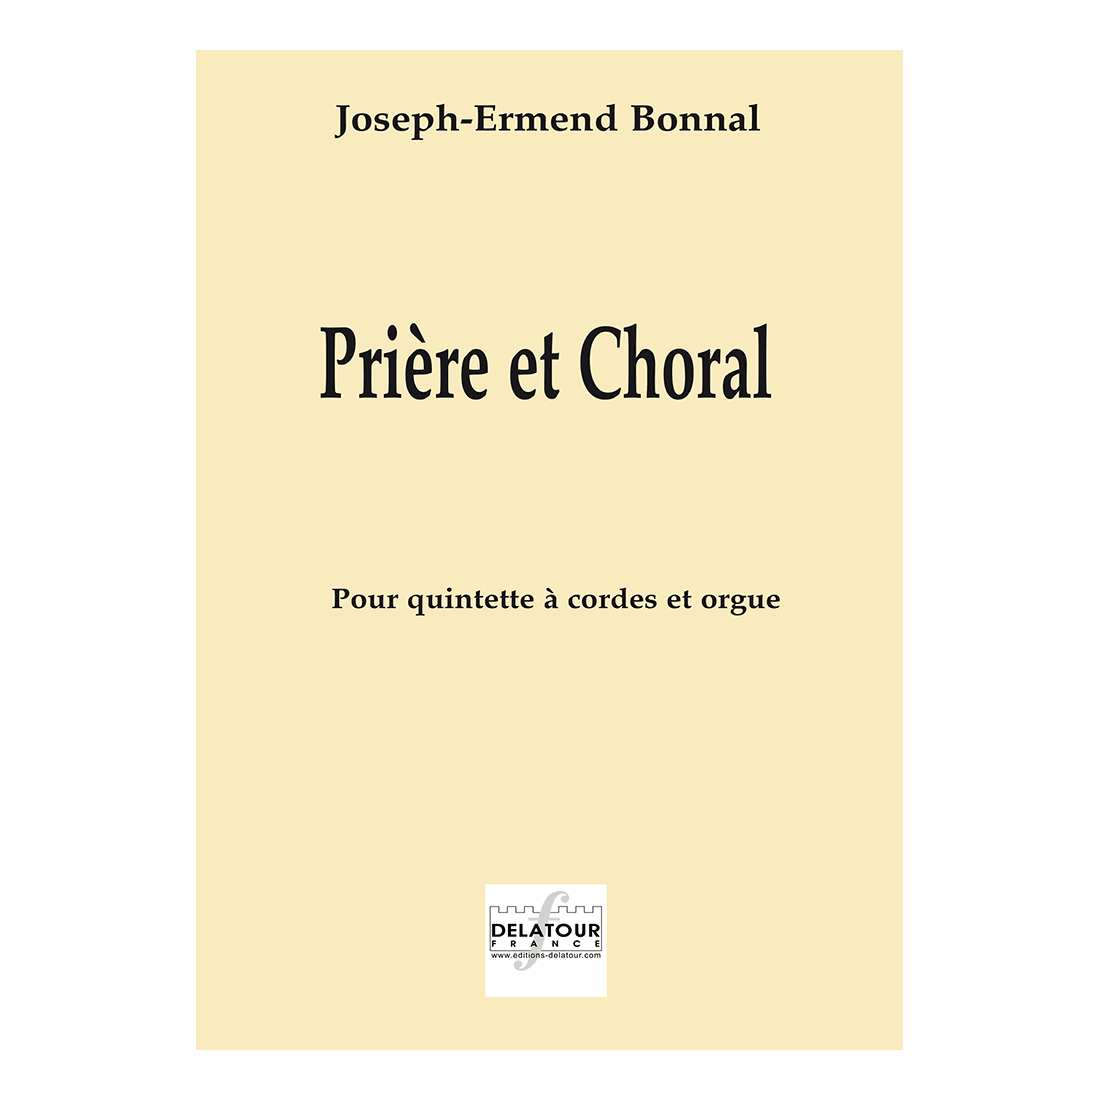 Prière et choral for organ and strings